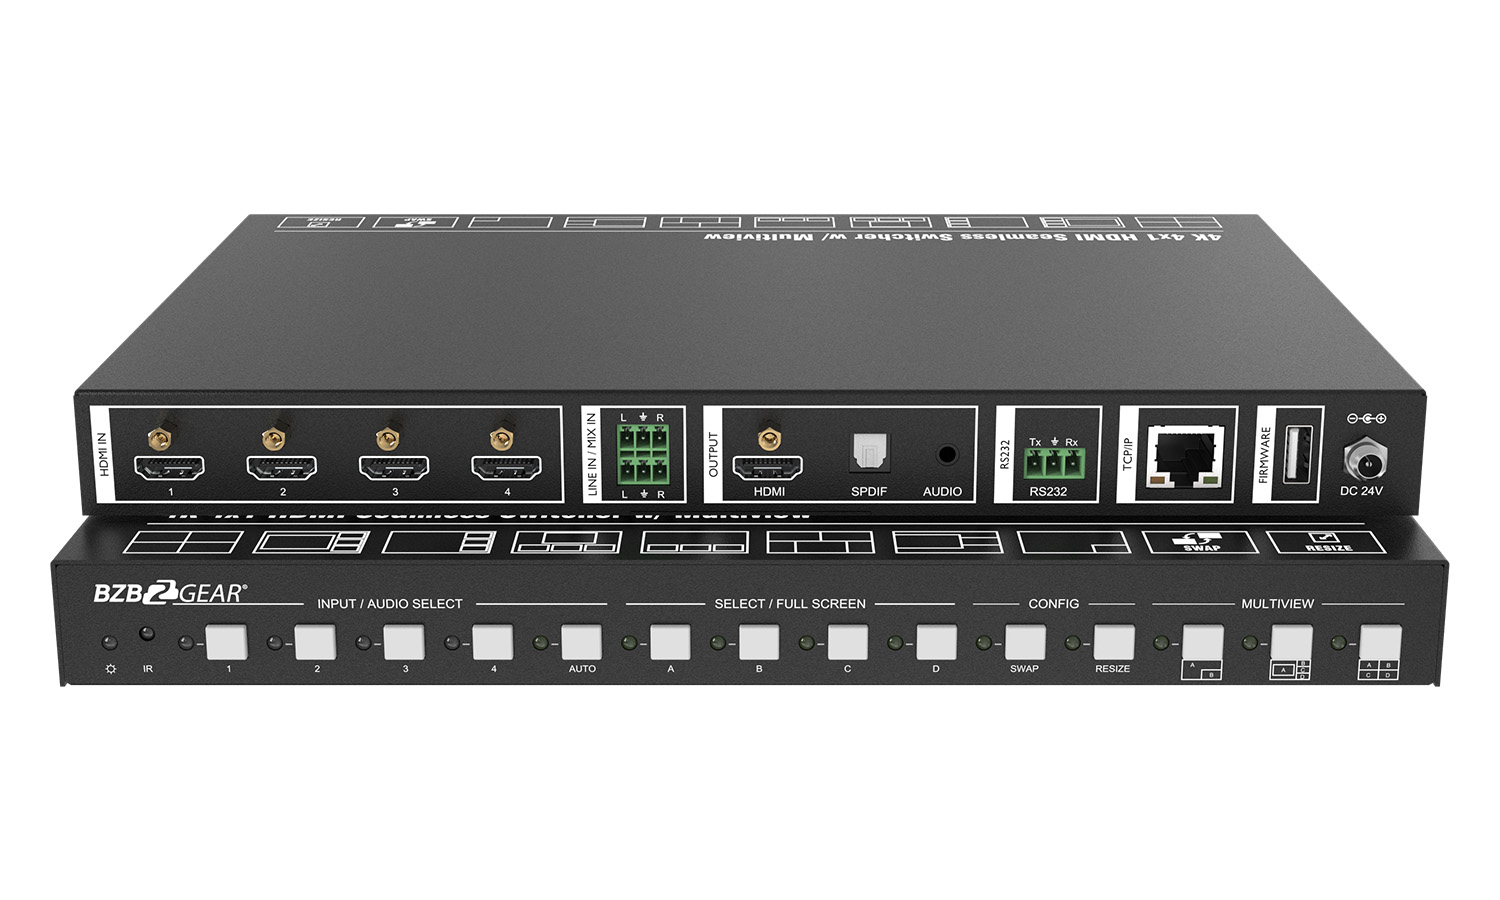 BG-UMV-HA41 4X1 4K HDMI Seamless Switcher/Scaler with Audio and Multiview by BZBGEAR